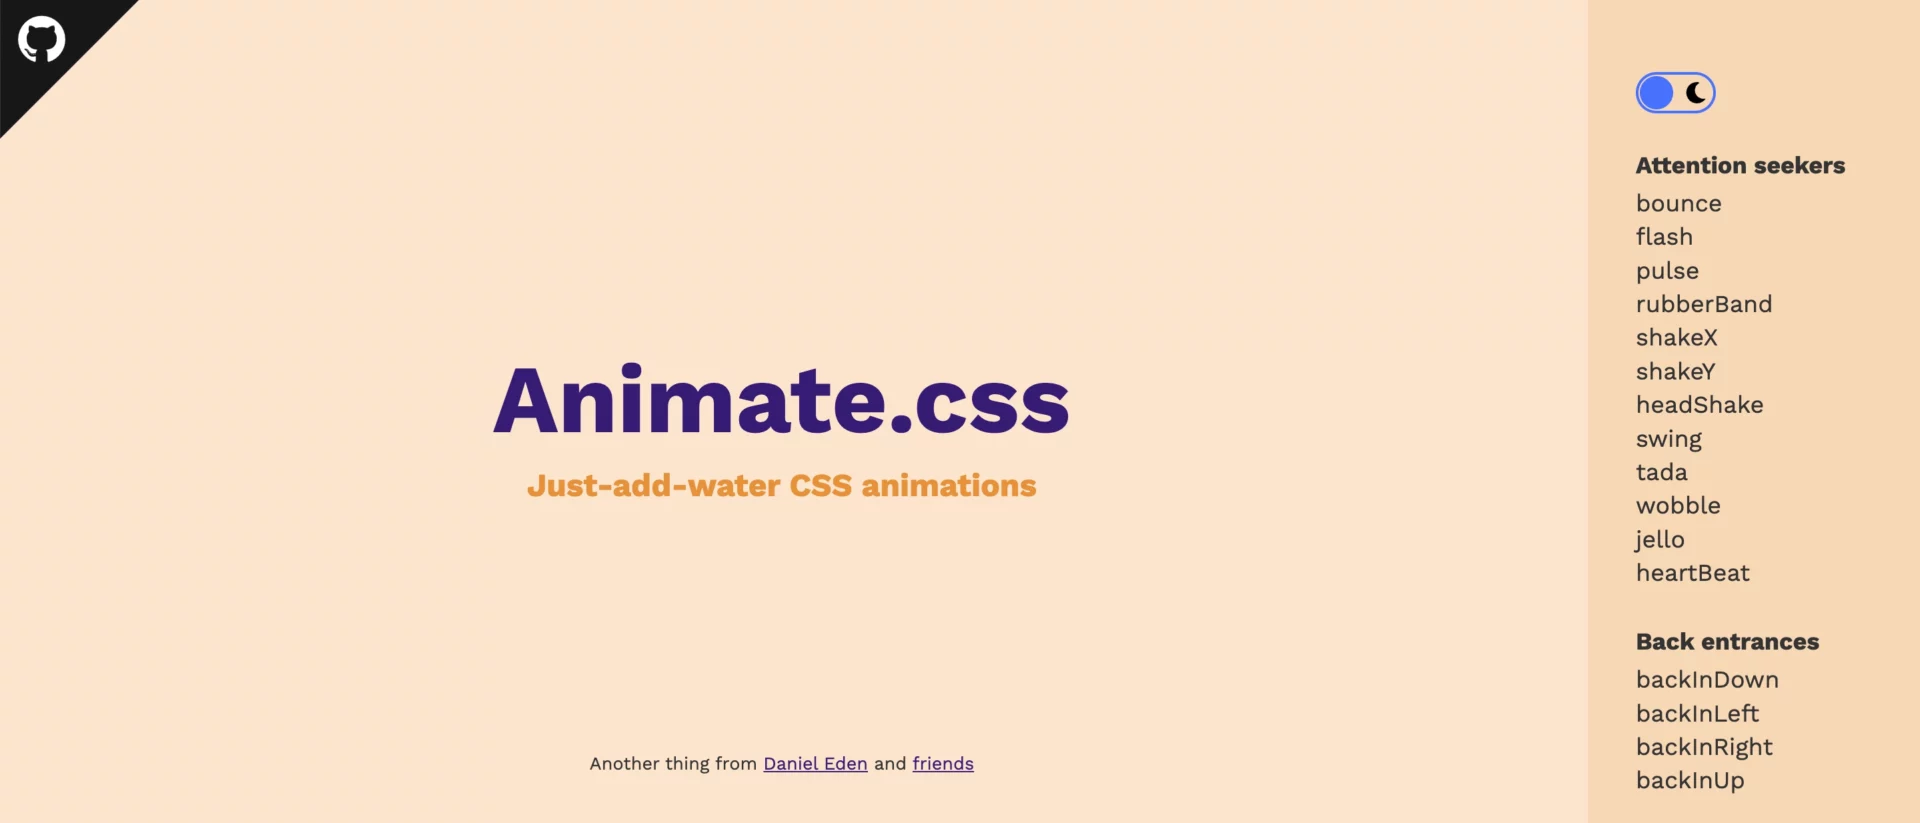 CSS animations examples gallery — ready to use on a landing page